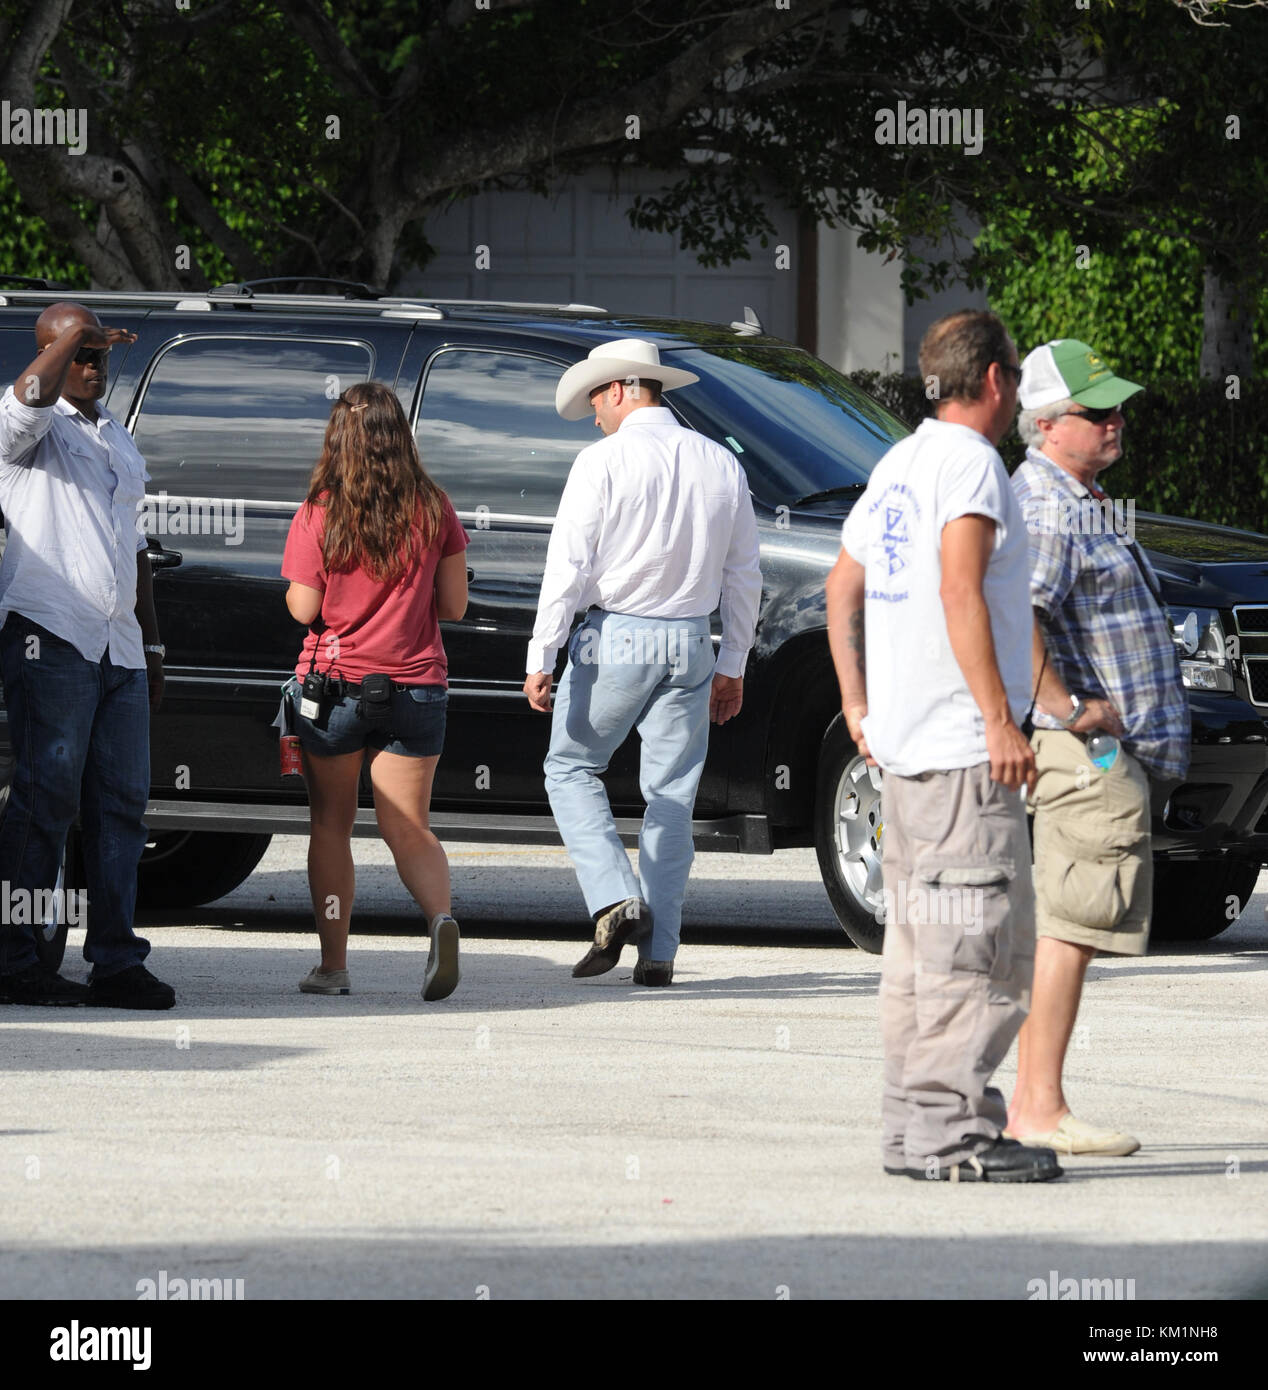 PALM BEACH, FL - SEPTEMBER 19: Actress/Singer Jennifer Lopez, and English actor Jason Statham on set filming their new crime/thriller 'Parker” directed by Taylor Hackford on Worth Avenue. On September 19, 2011 in Palm Beach, Florida  People:  Jason Statham Stock Photo